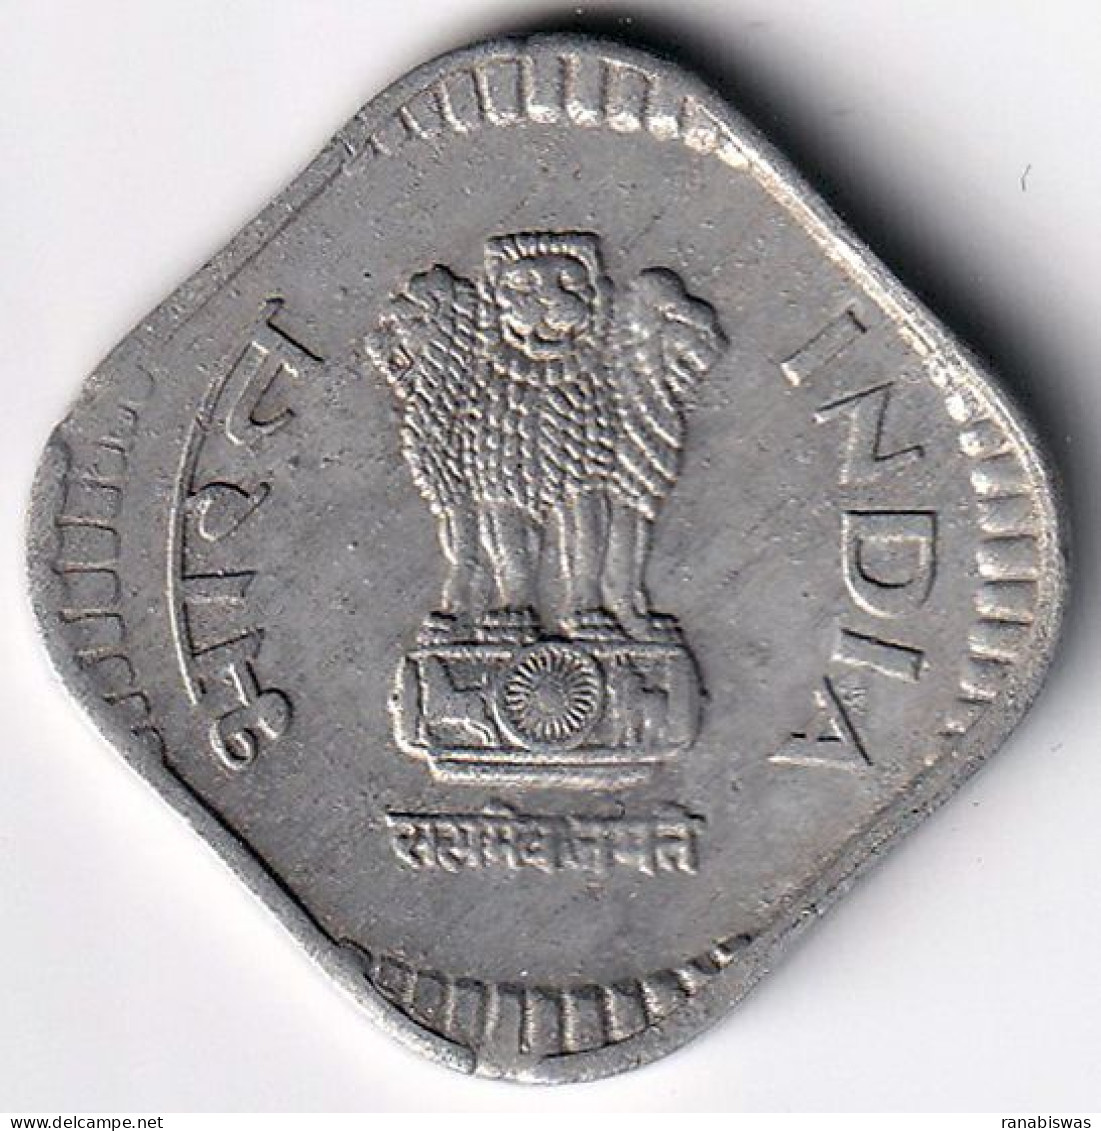 INDIA COIN LOT 363, 5 PAISE 1988, HYDERABAD MINT, AUNC - Indien